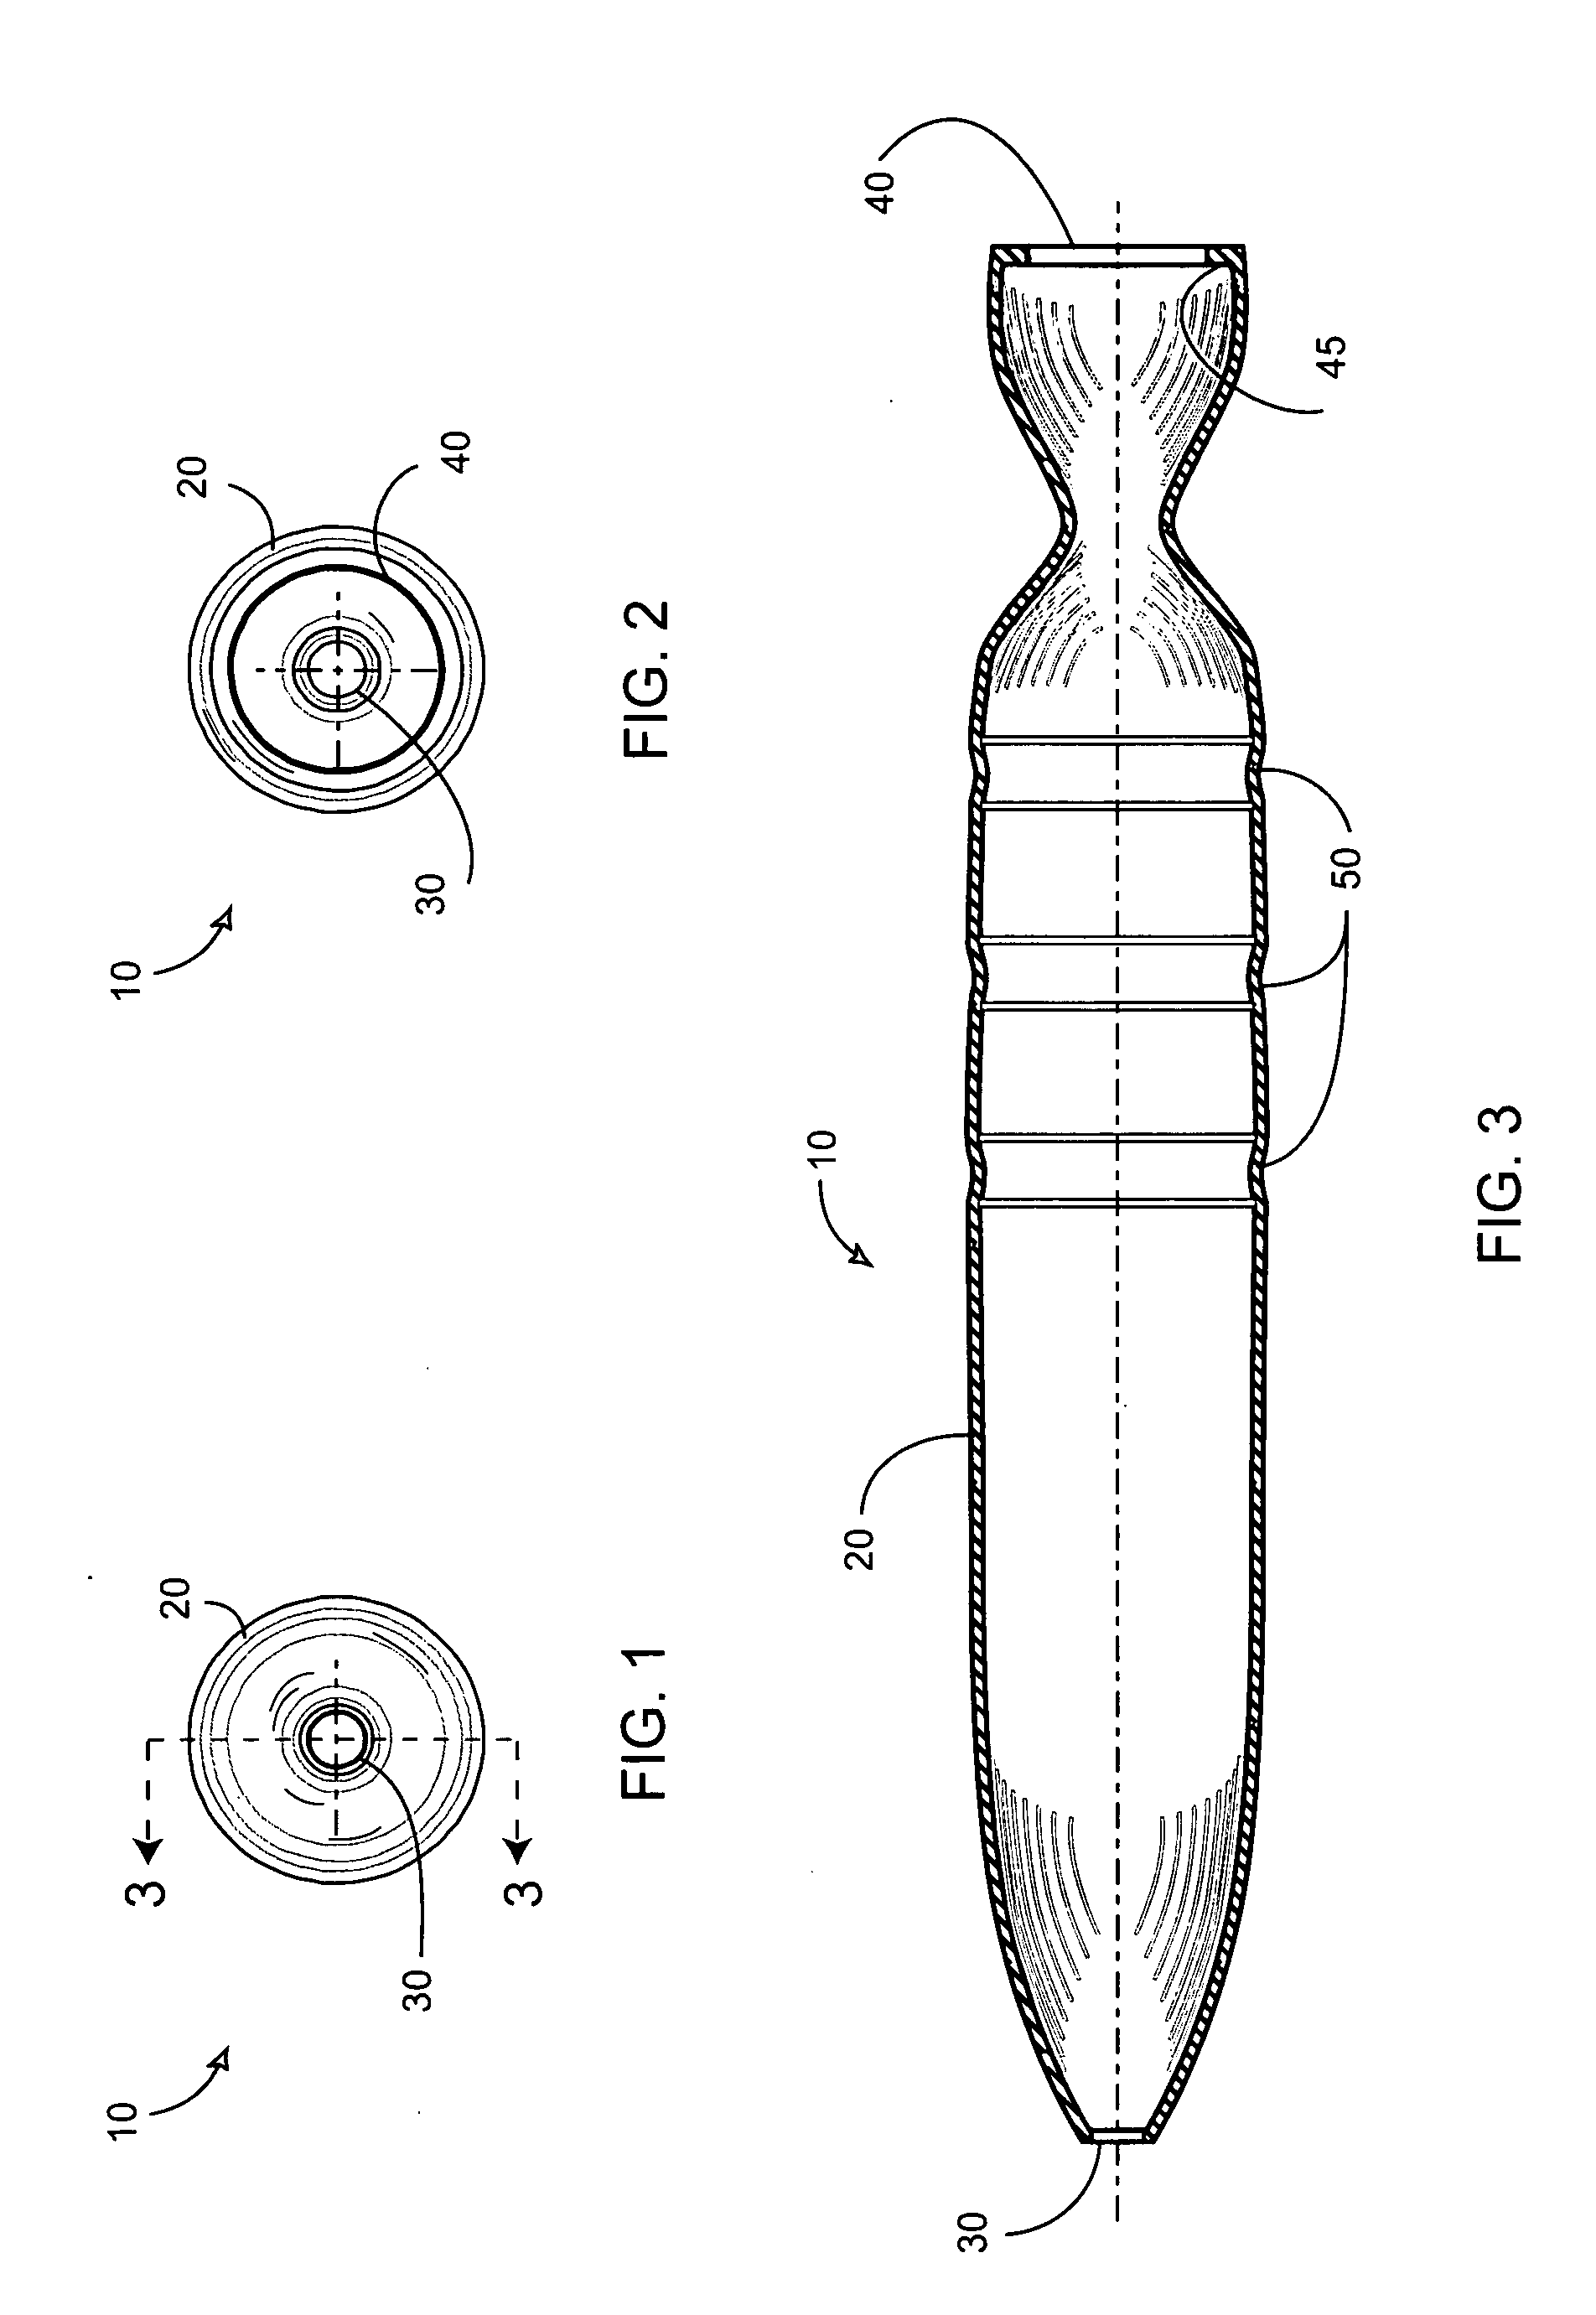 Vaginal dilator for use in vaginal rehabilitation and methods therefor